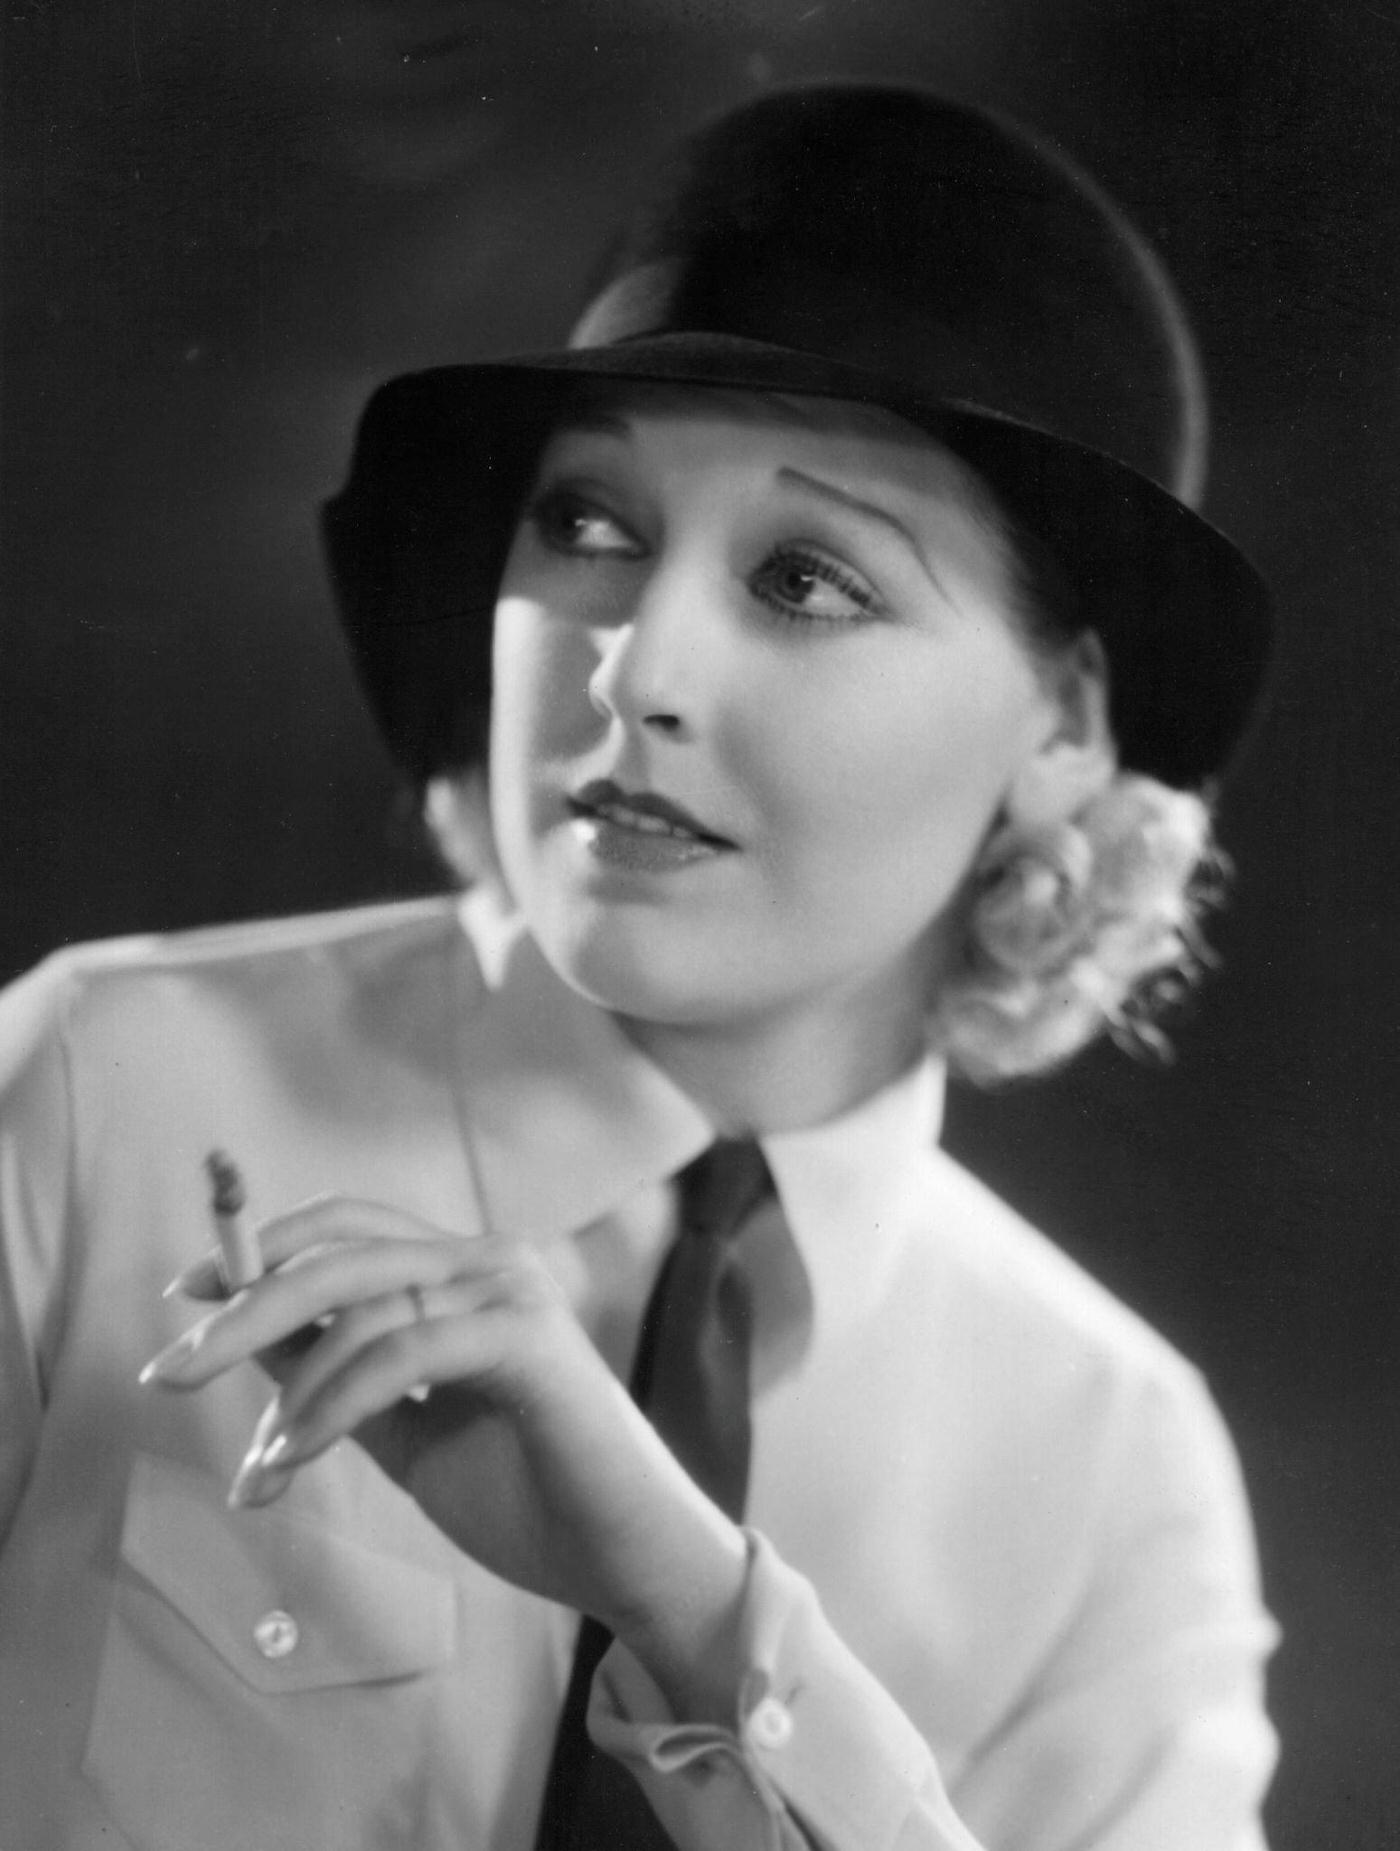 Thelma Todd, the perky American leading lady and heroine of many comedies, starred in Hal Roach comedies, died mid-career, 1935.